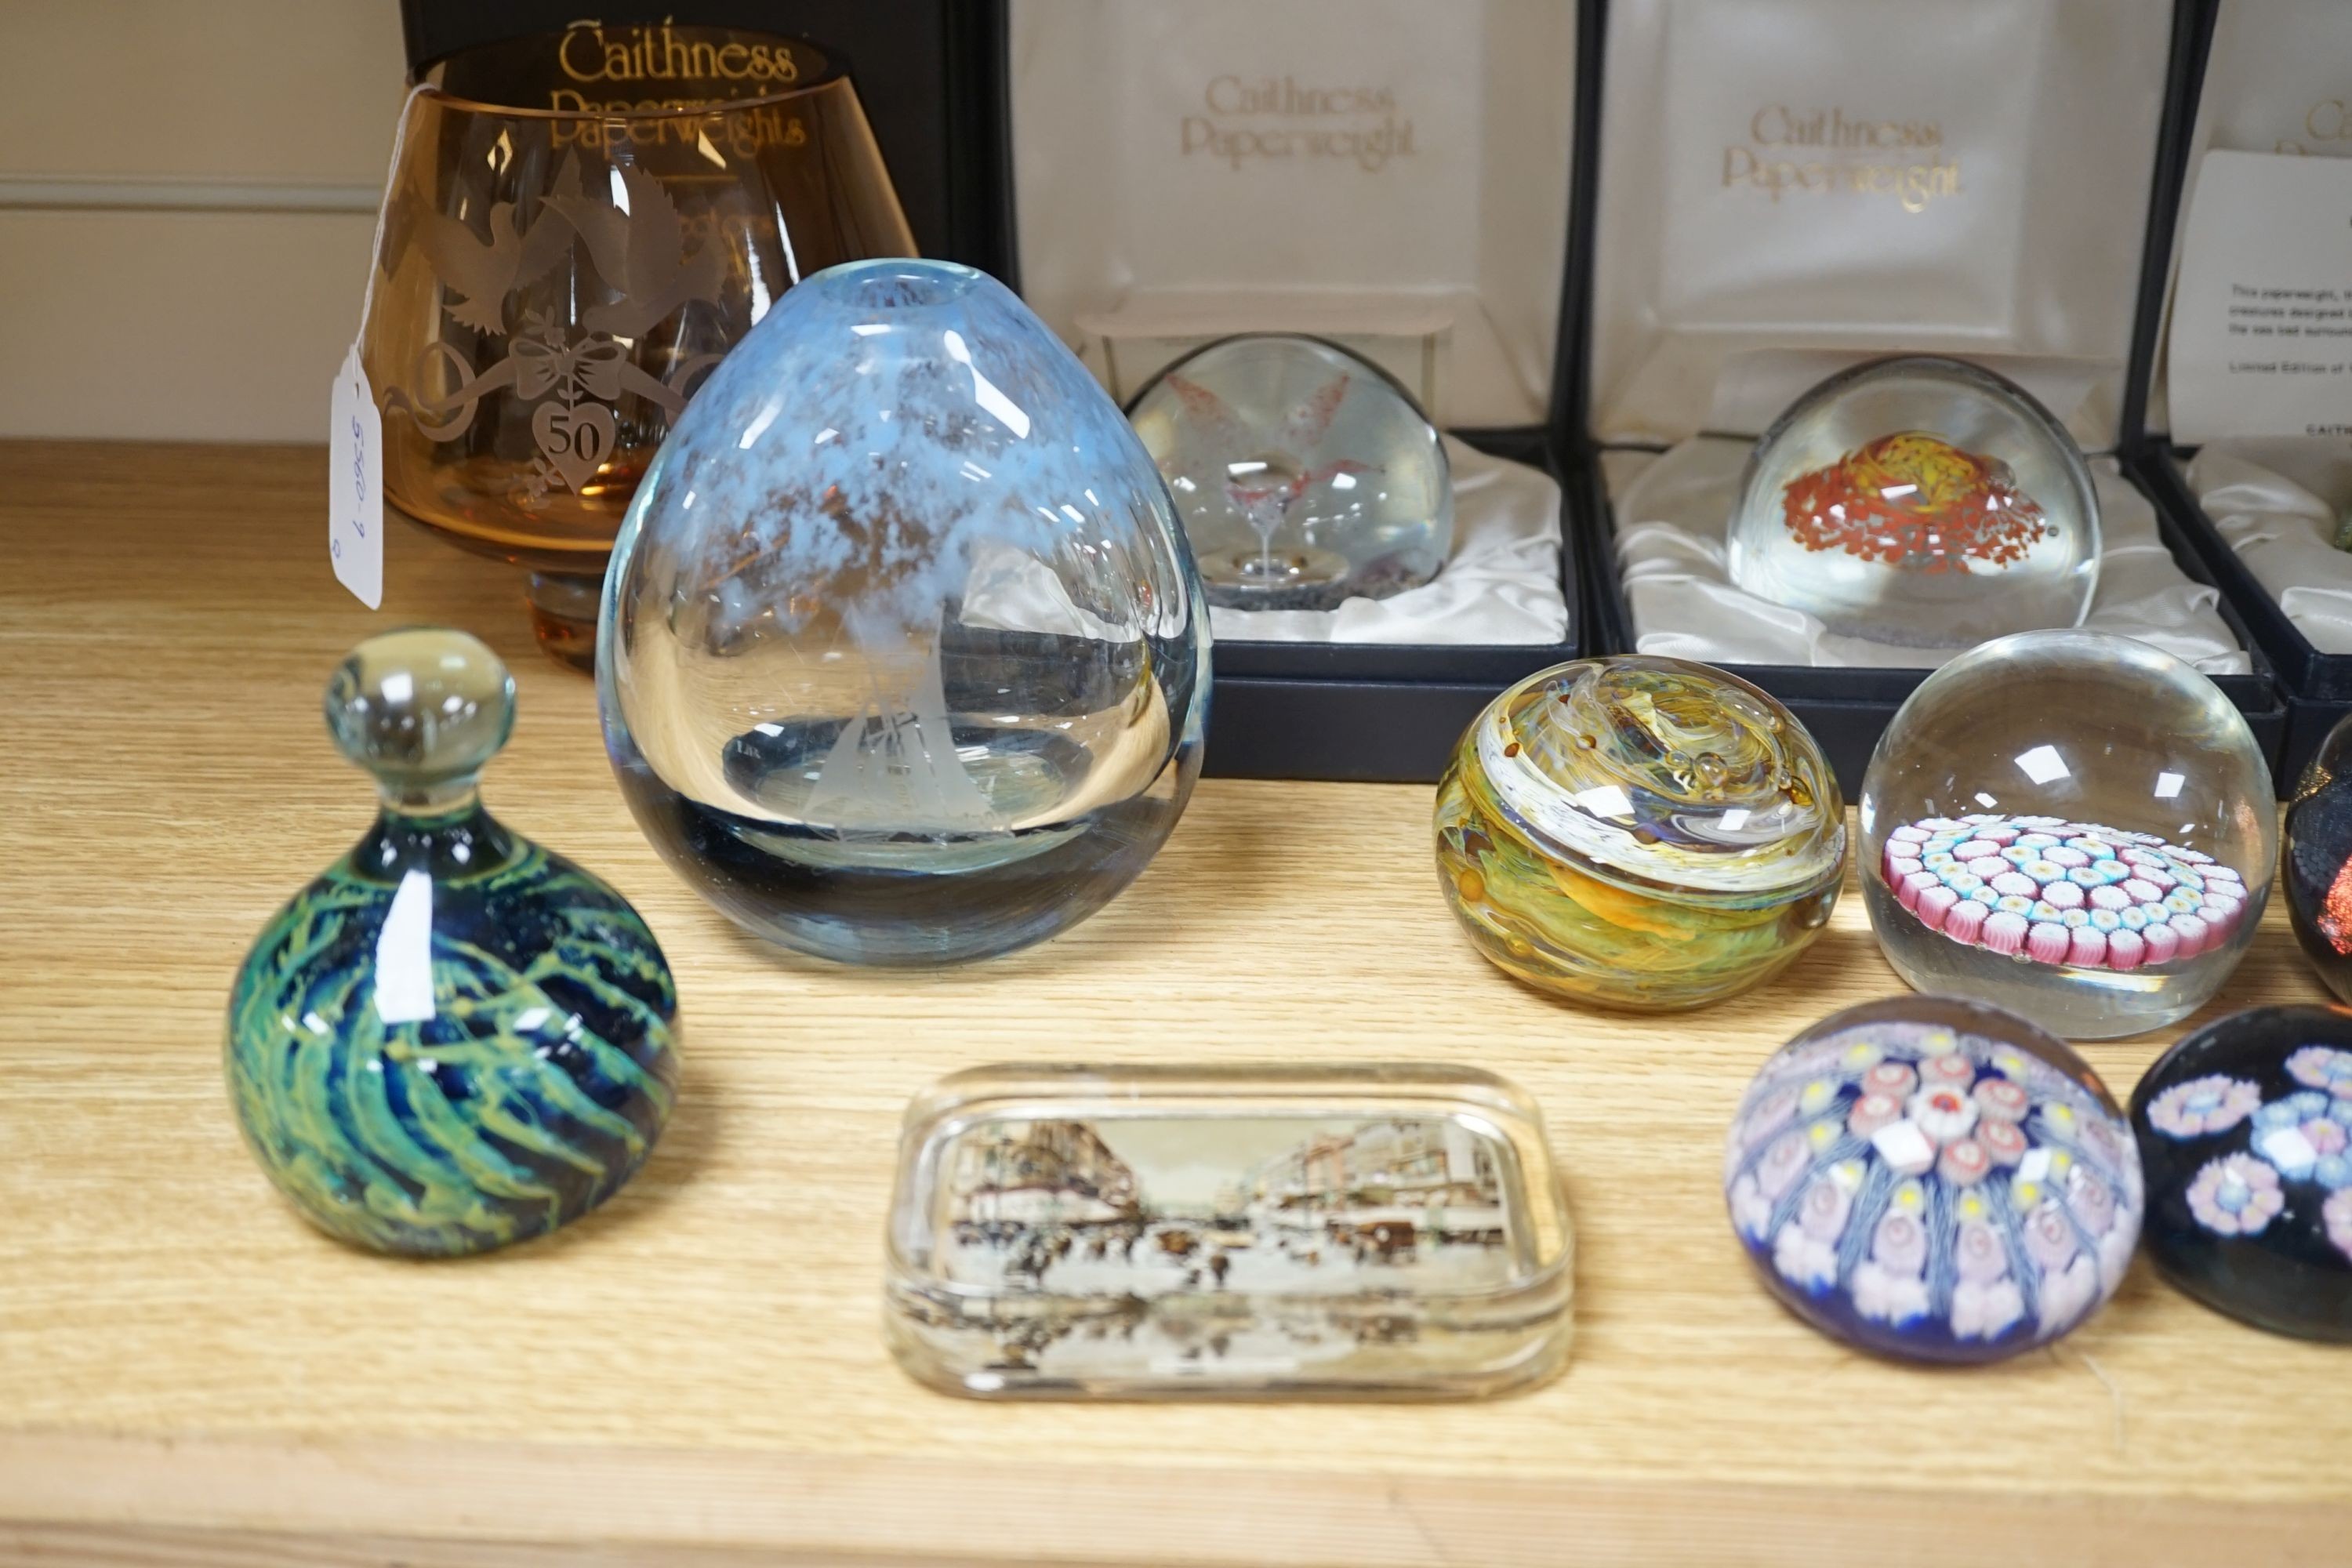 2 Caithness glass vases together with 11 various paperweights, including 3 boxed Caithness and a Baccarat paperweight.